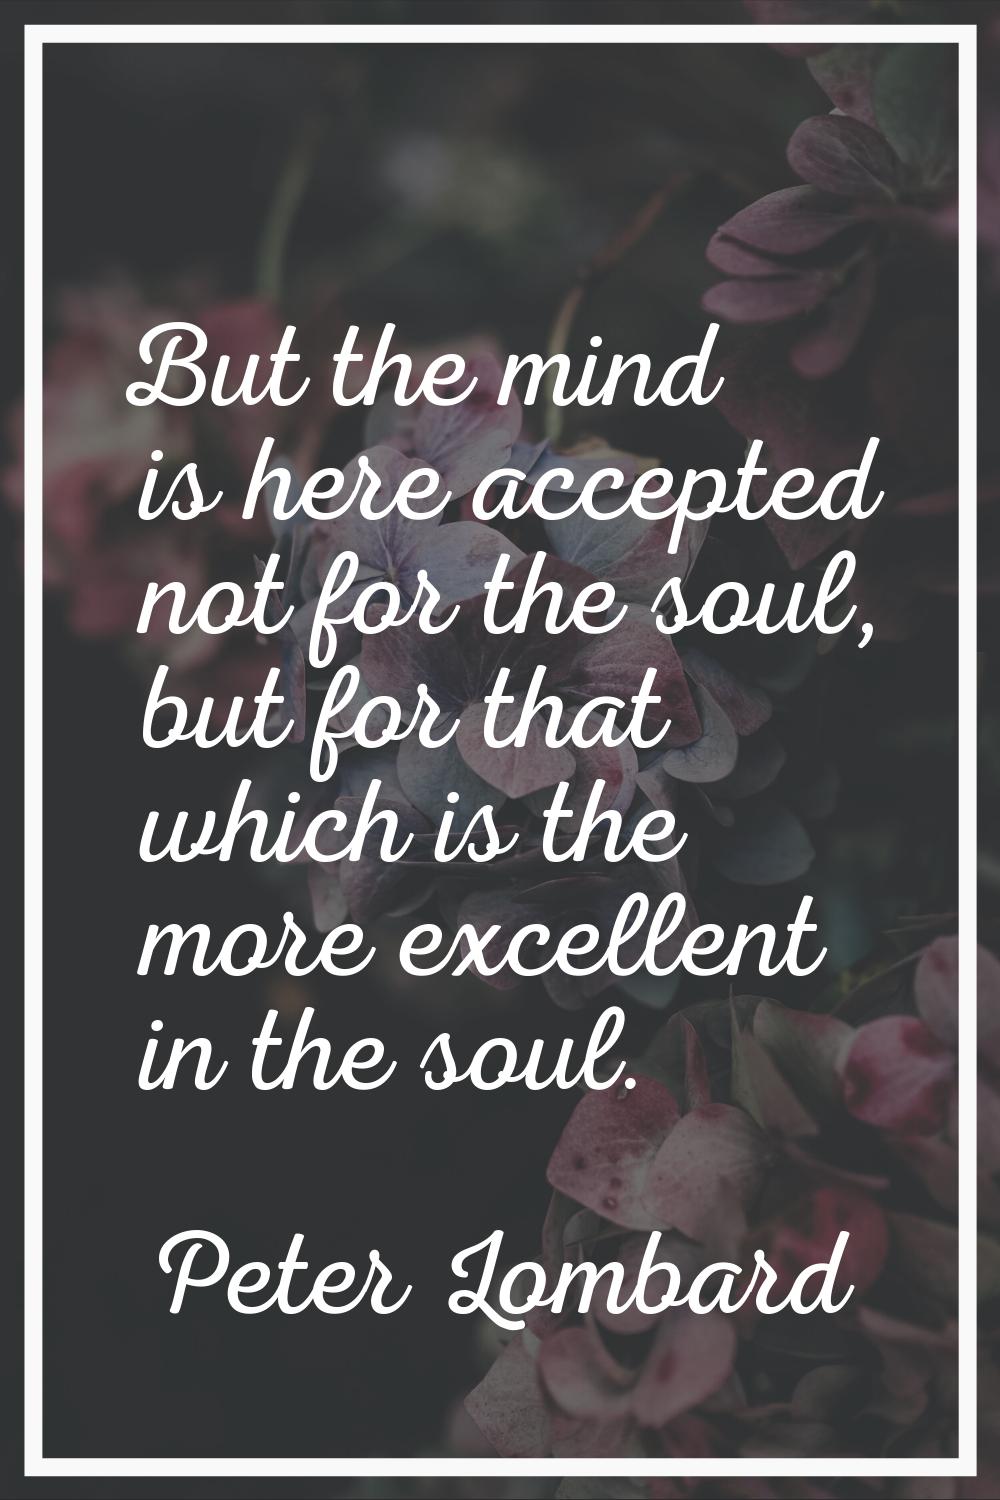 But the mind is here accepted not for the soul, but for that which is the more excellent in the sou